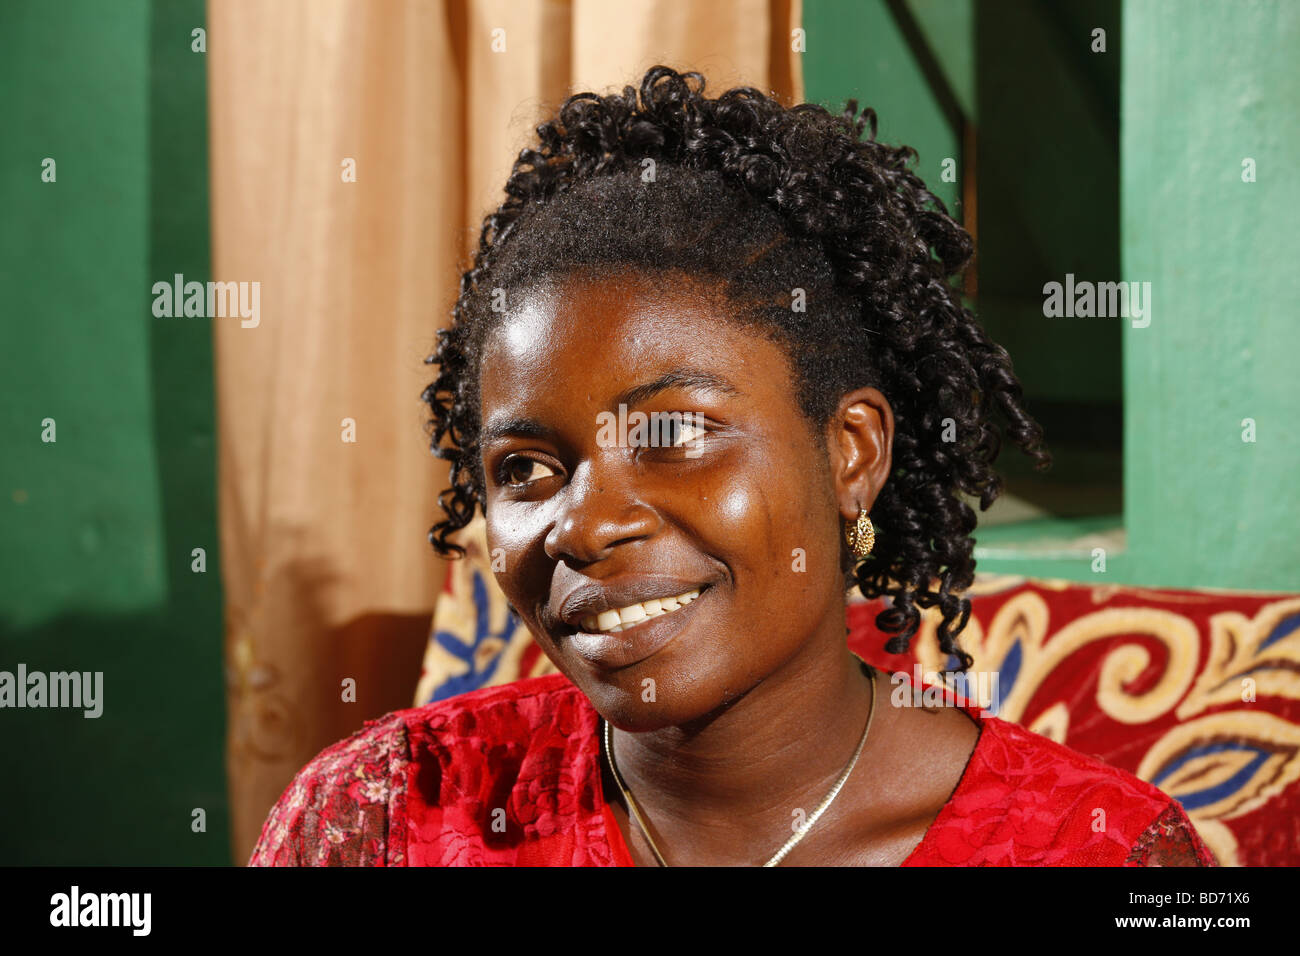 Princess Mirabelle, one of the six wives of the Fon, chief farmstead, Bafut, West Cameroon, Cameroon, Africa Stock Photo